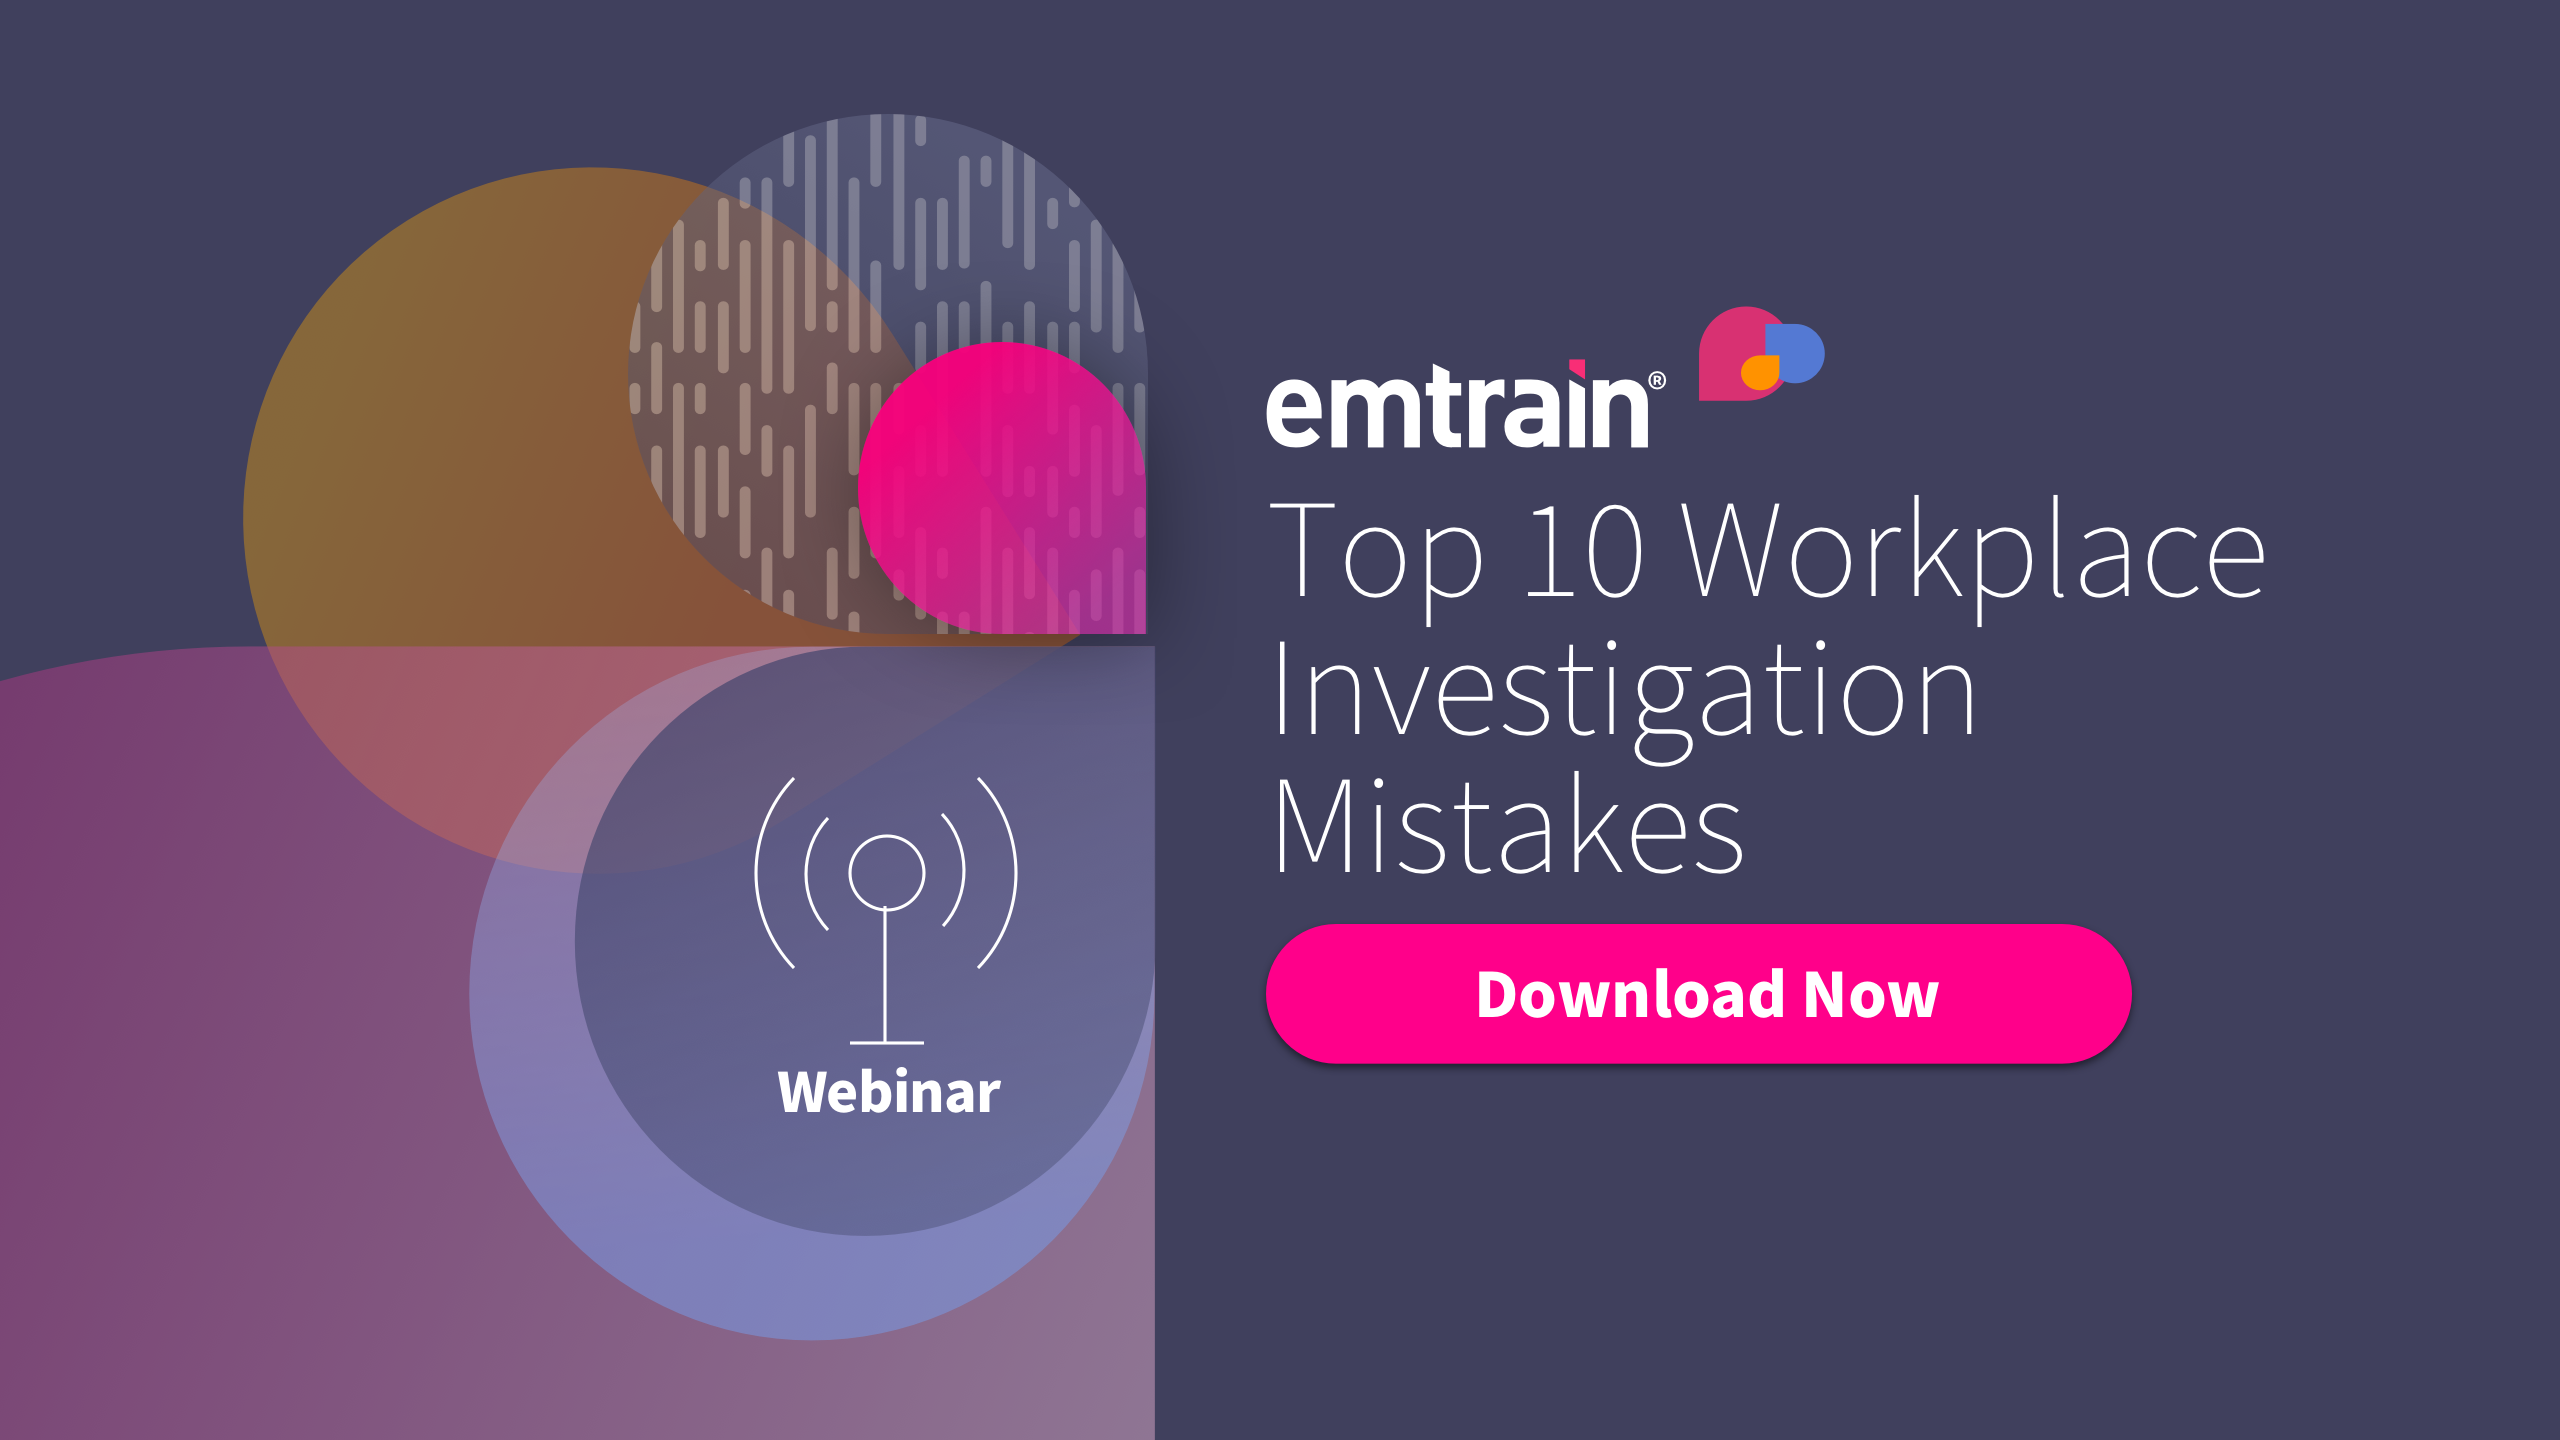 Top 10 Workplace Investigation Mistakes